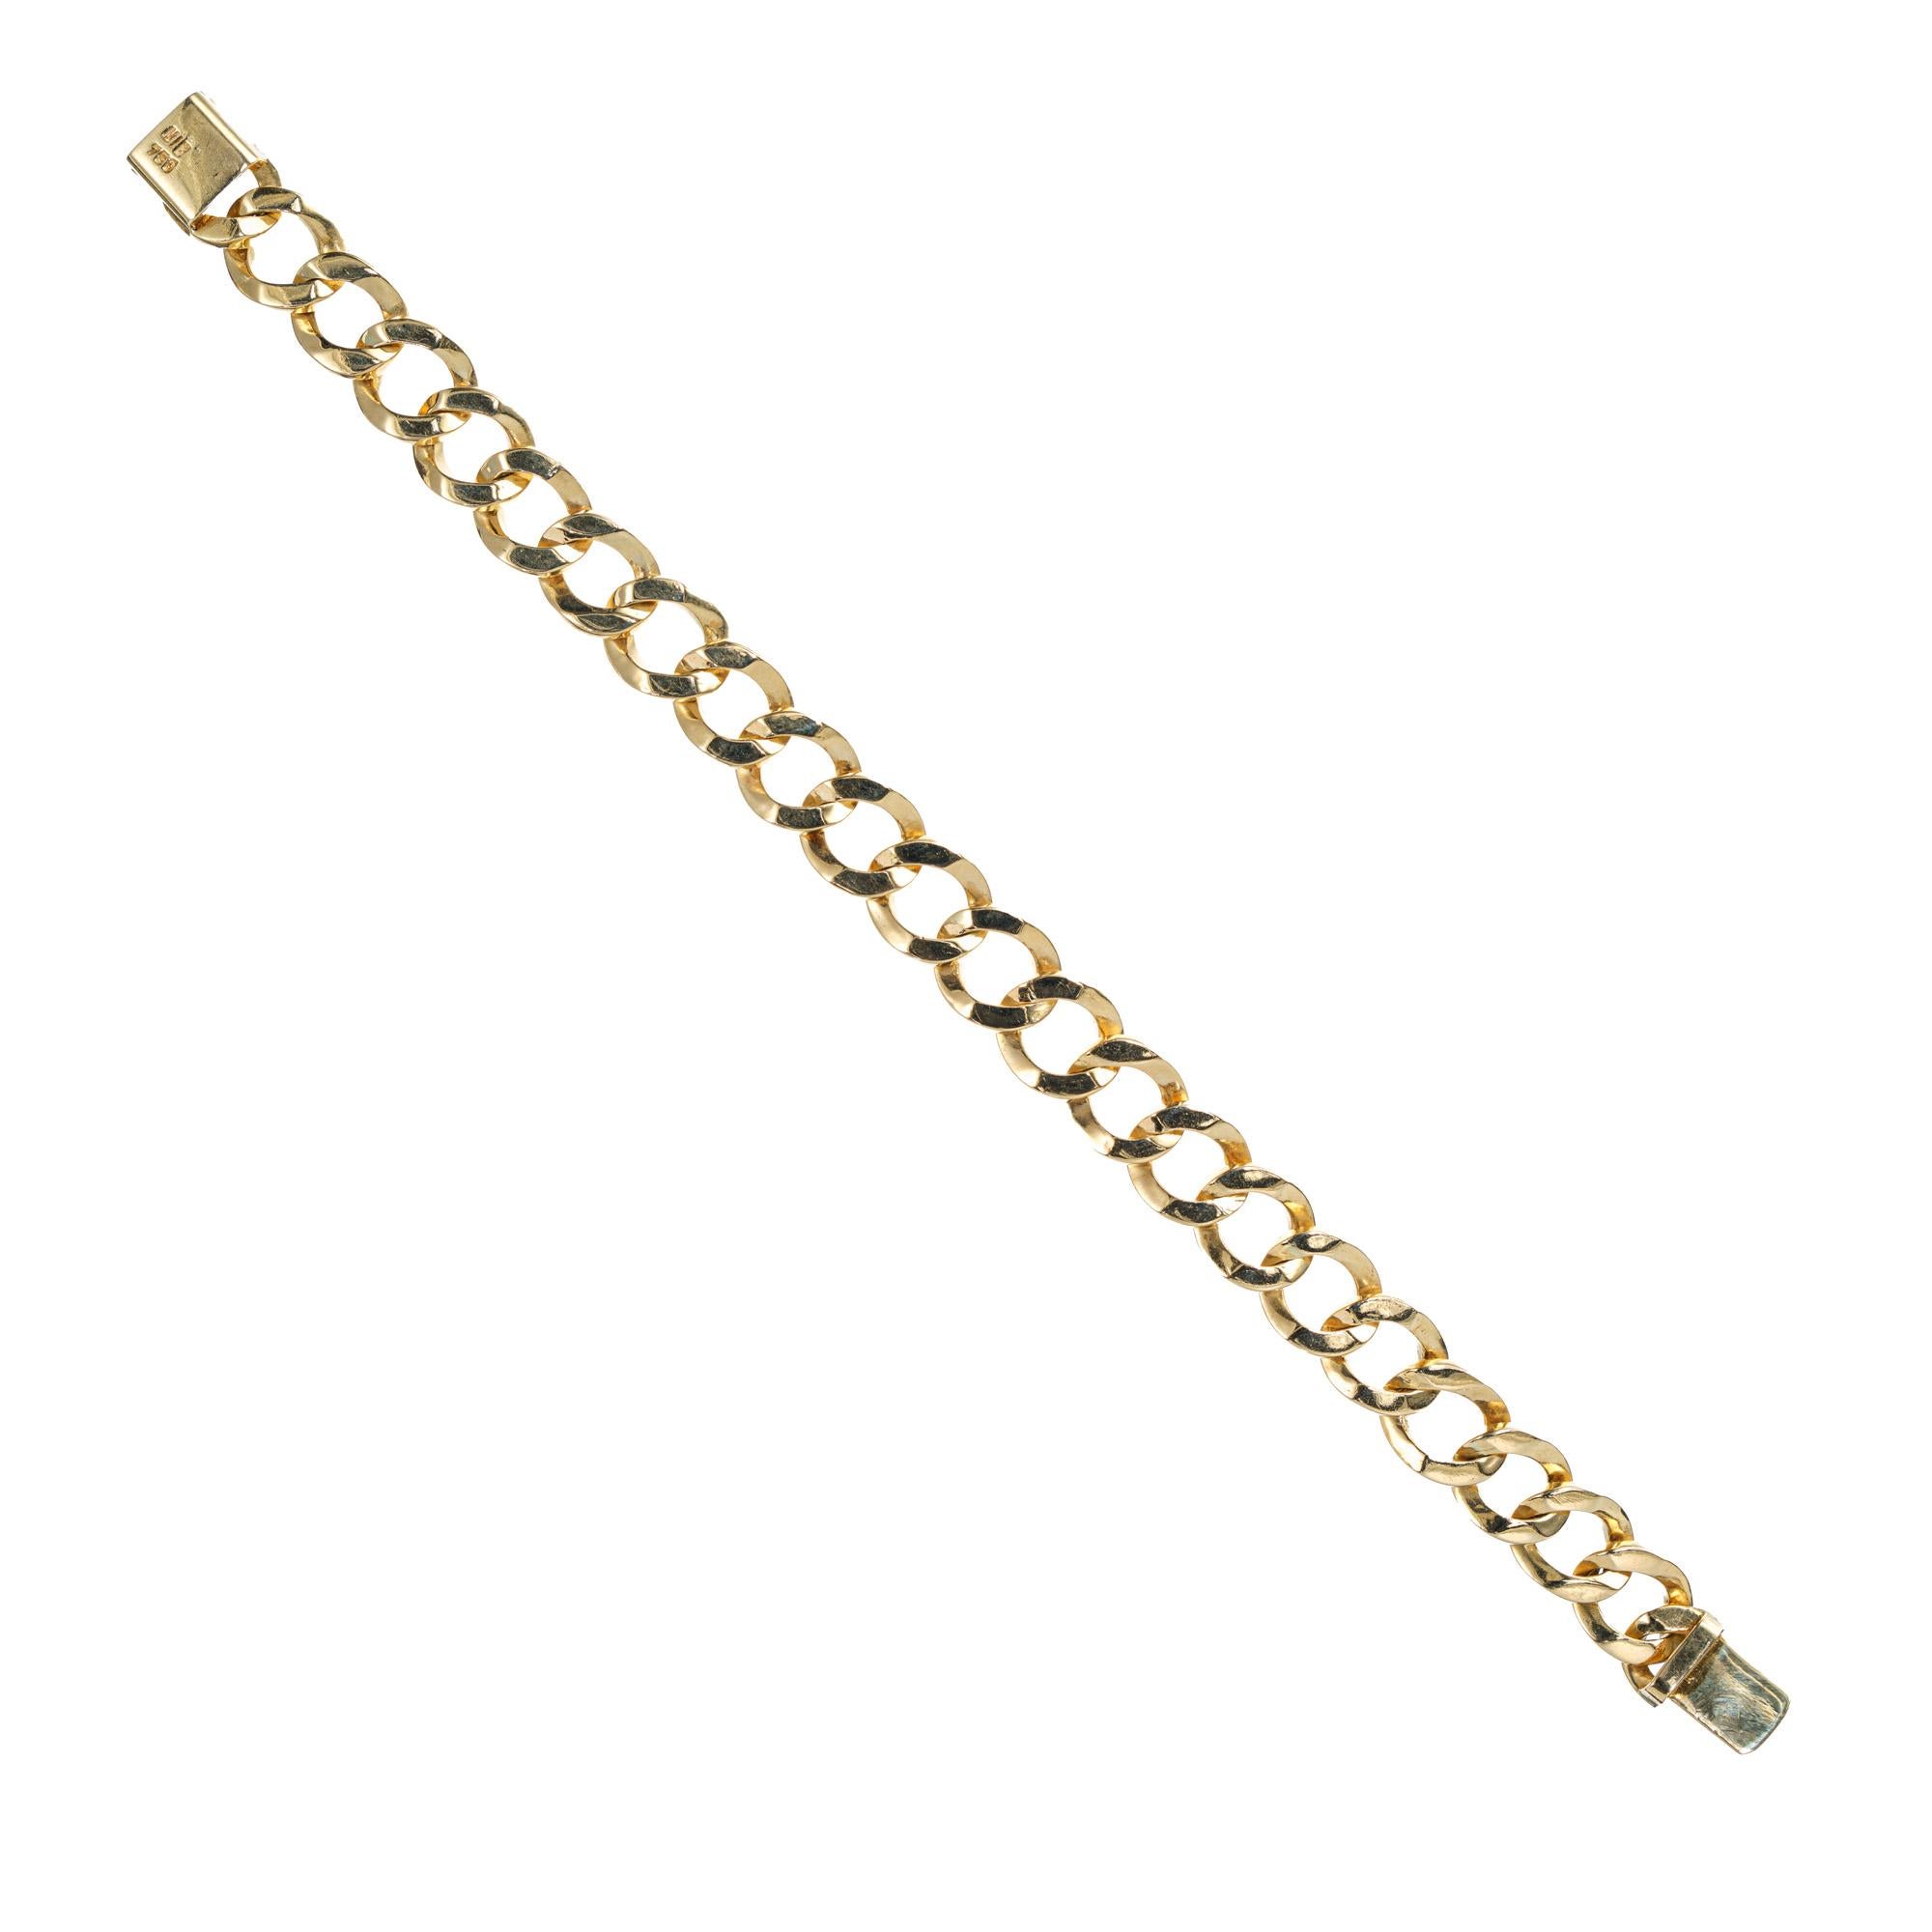 1970's 11mm wide heavy solid 18k gold rounded curb link bracelet. 7.5 inches long

18k yellow gold 
Stamped: 750
44.9 grams
Bracelet: 7.5 Inches
Width: 11mm
Thickness/depth: 3.3mm
